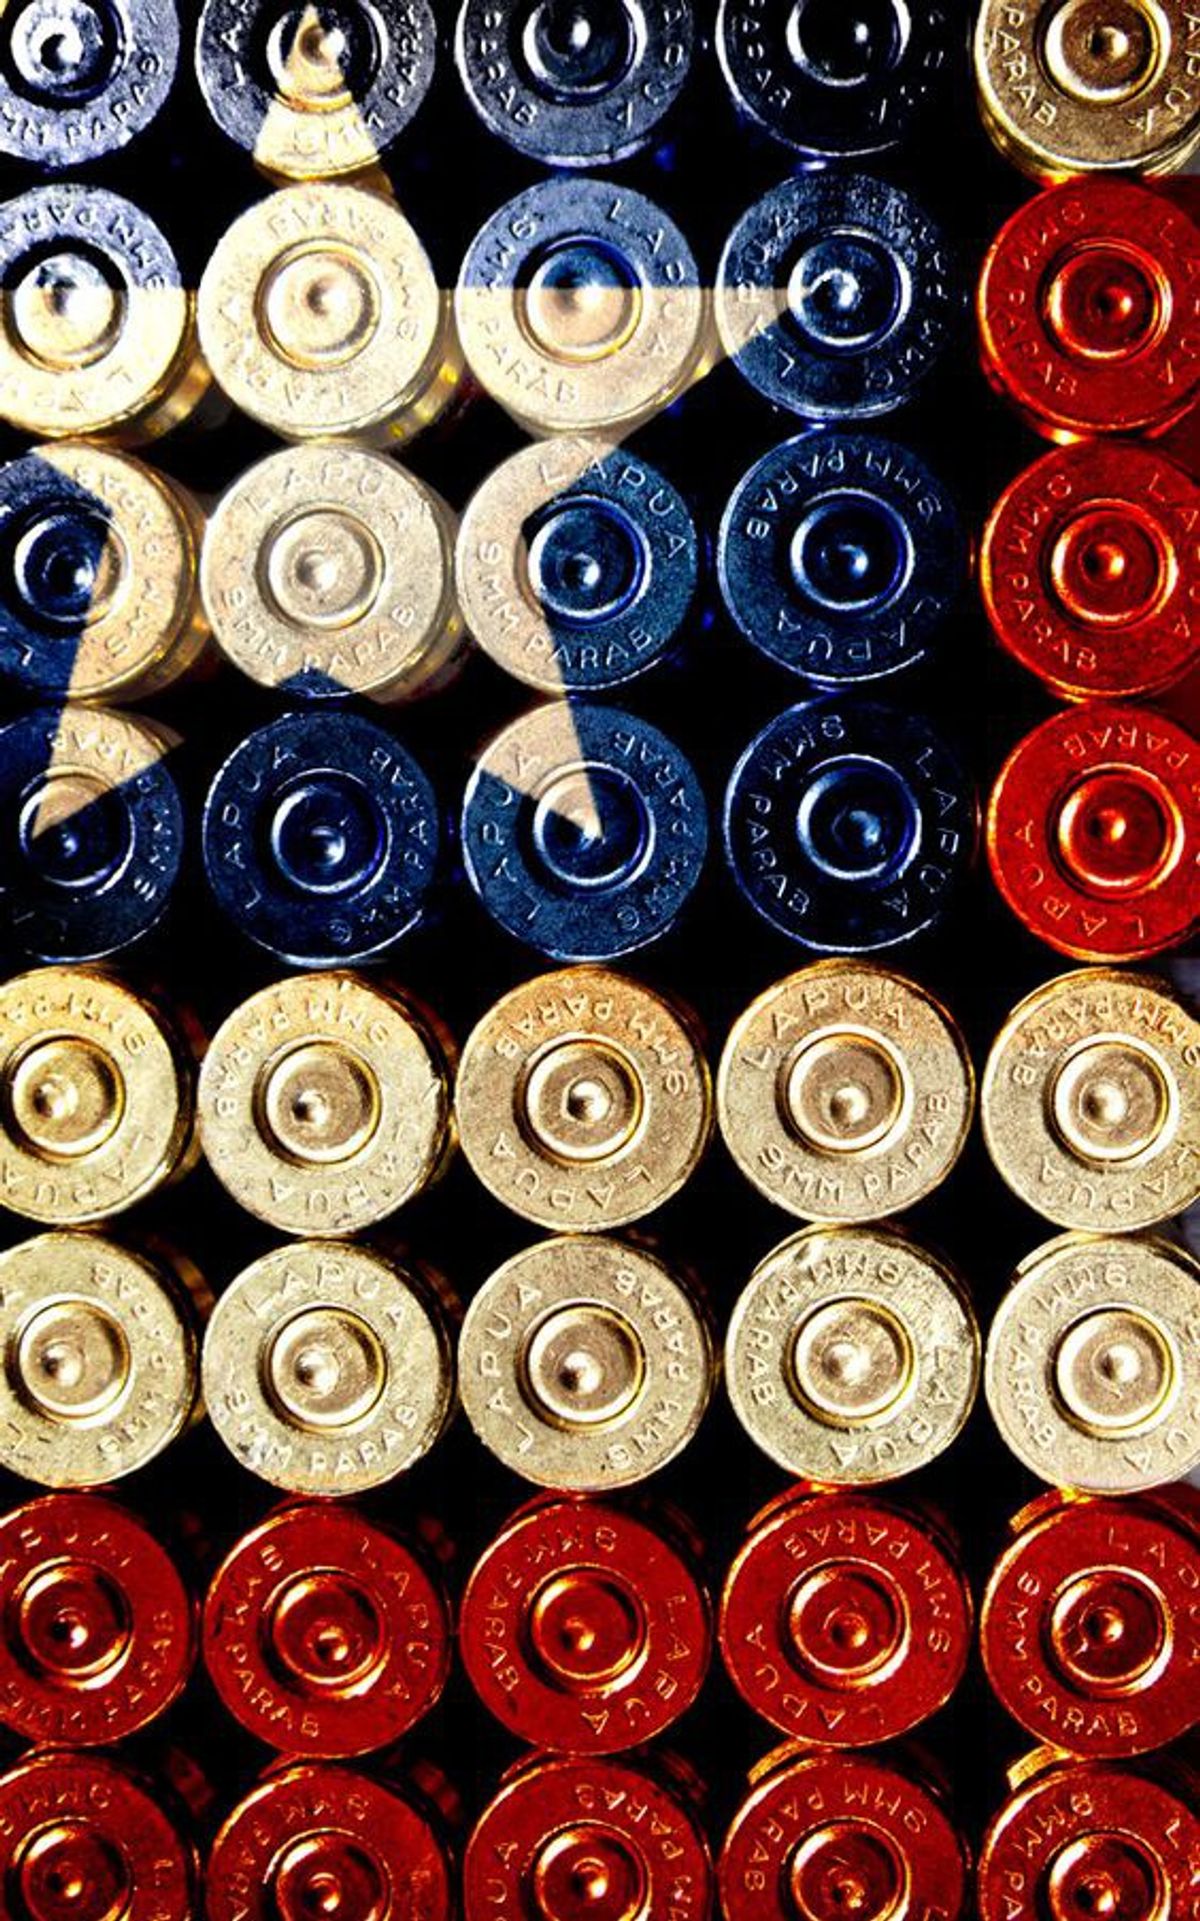 Locked And Loaded: Gun Control